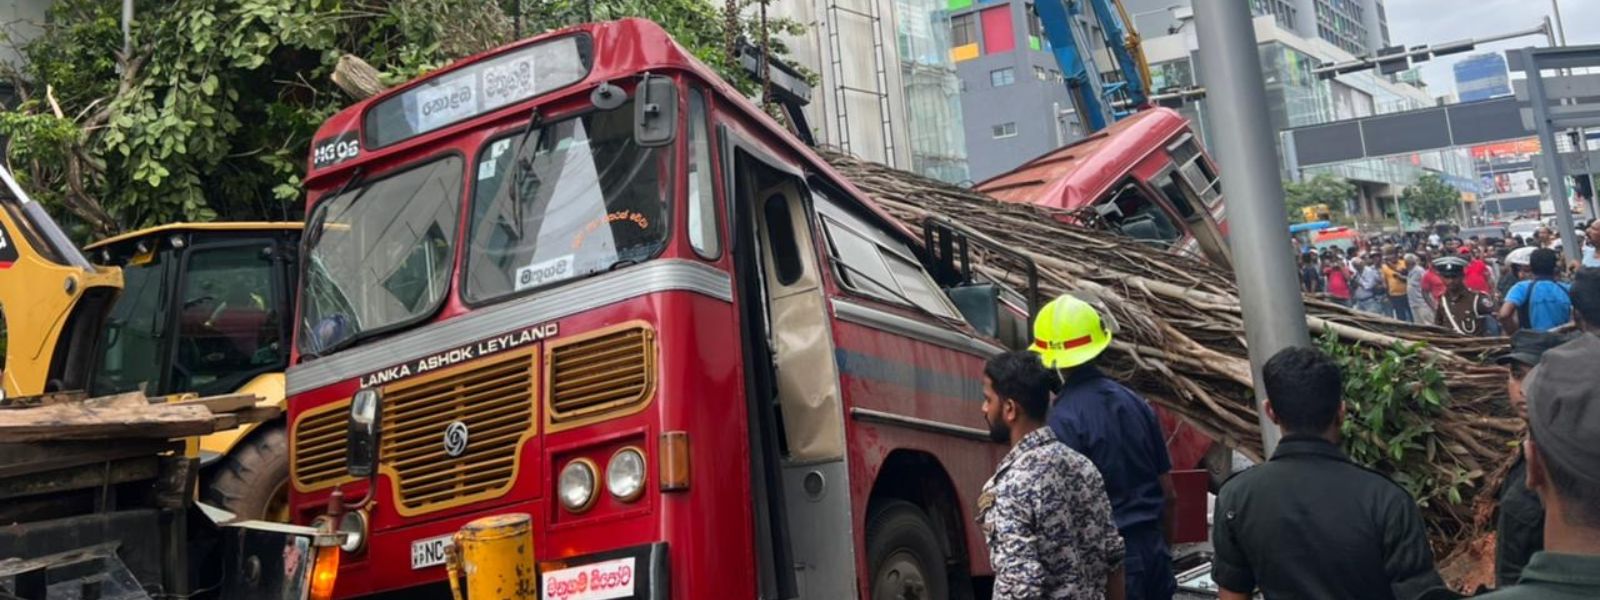 Tree falls onto bus in Colpetty; Rescue op ongoing